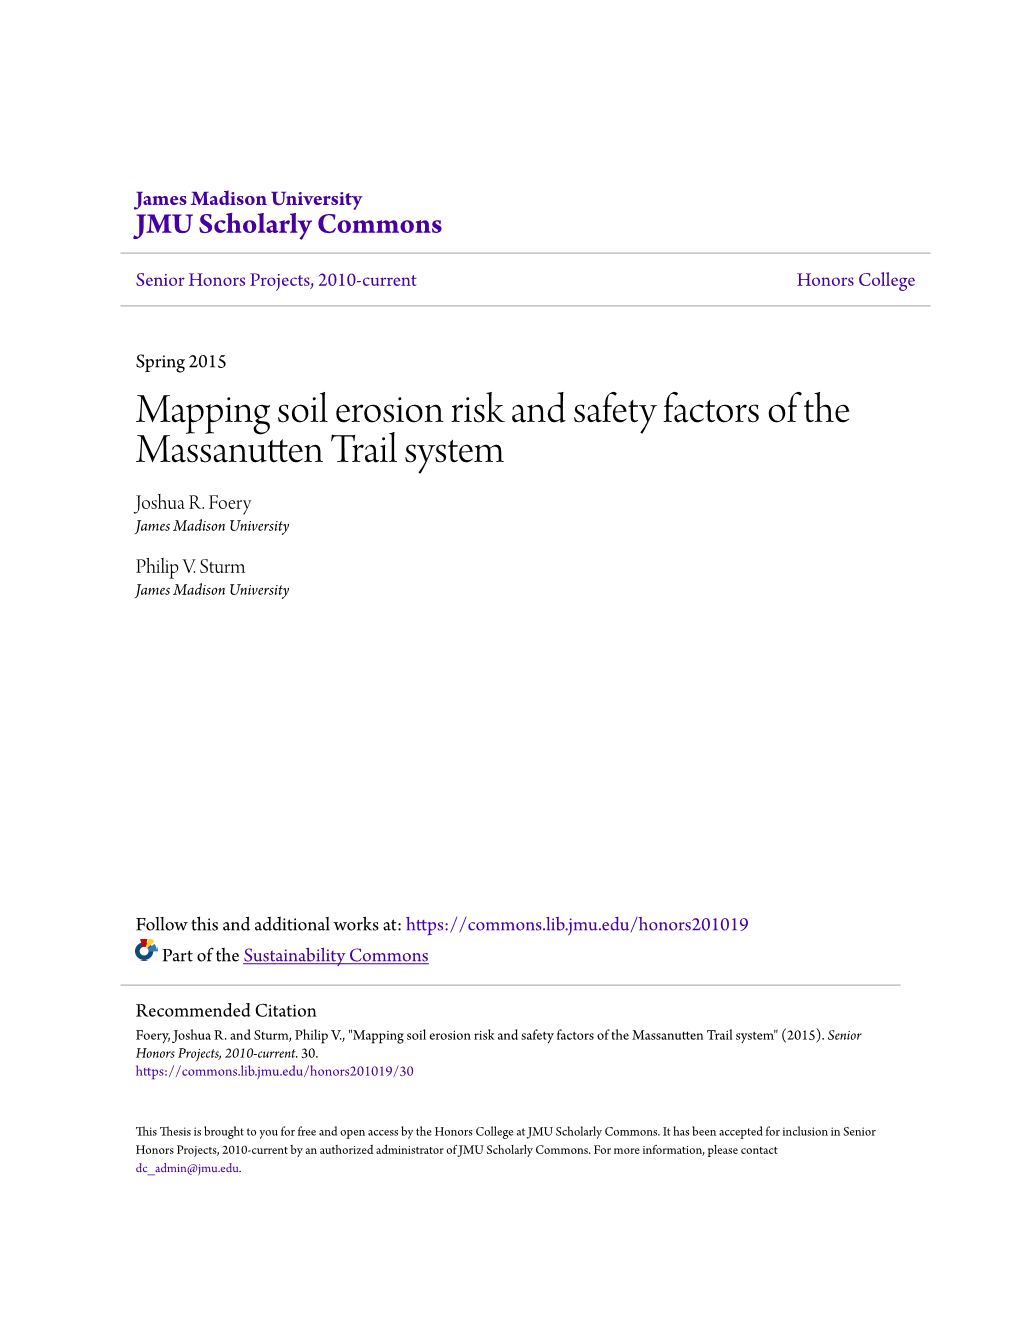 Mapping Soil Erosion Risk and Safety Factors of the Massanutten Trail System Joshua R